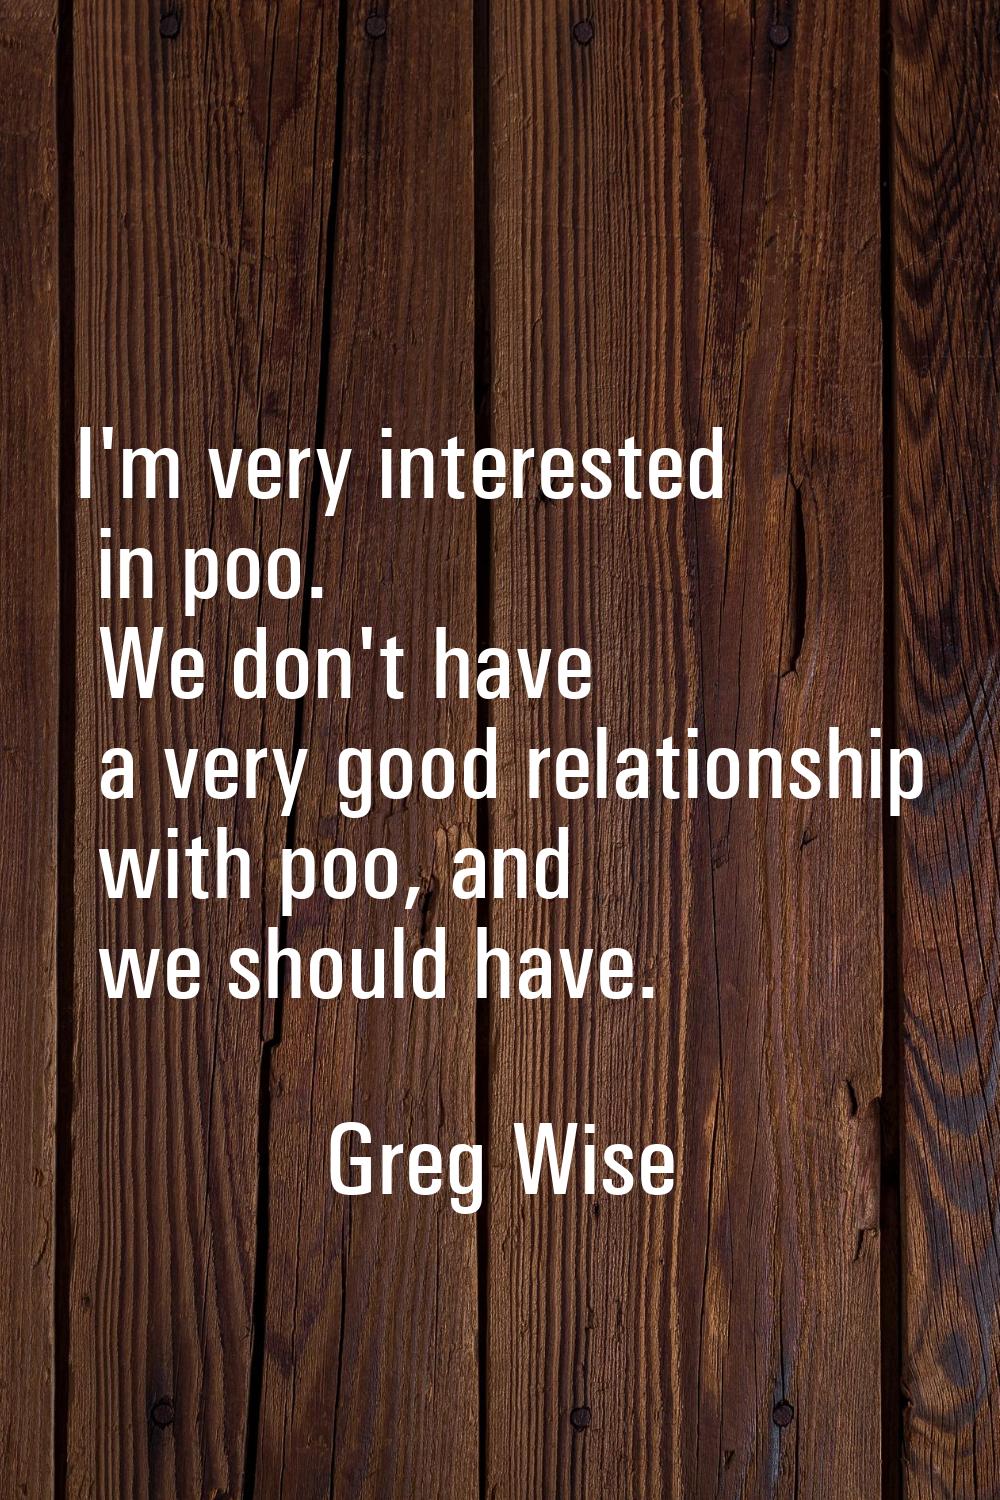 I'm very interested in poo. We don't have a very good relationship with poo, and we should have.